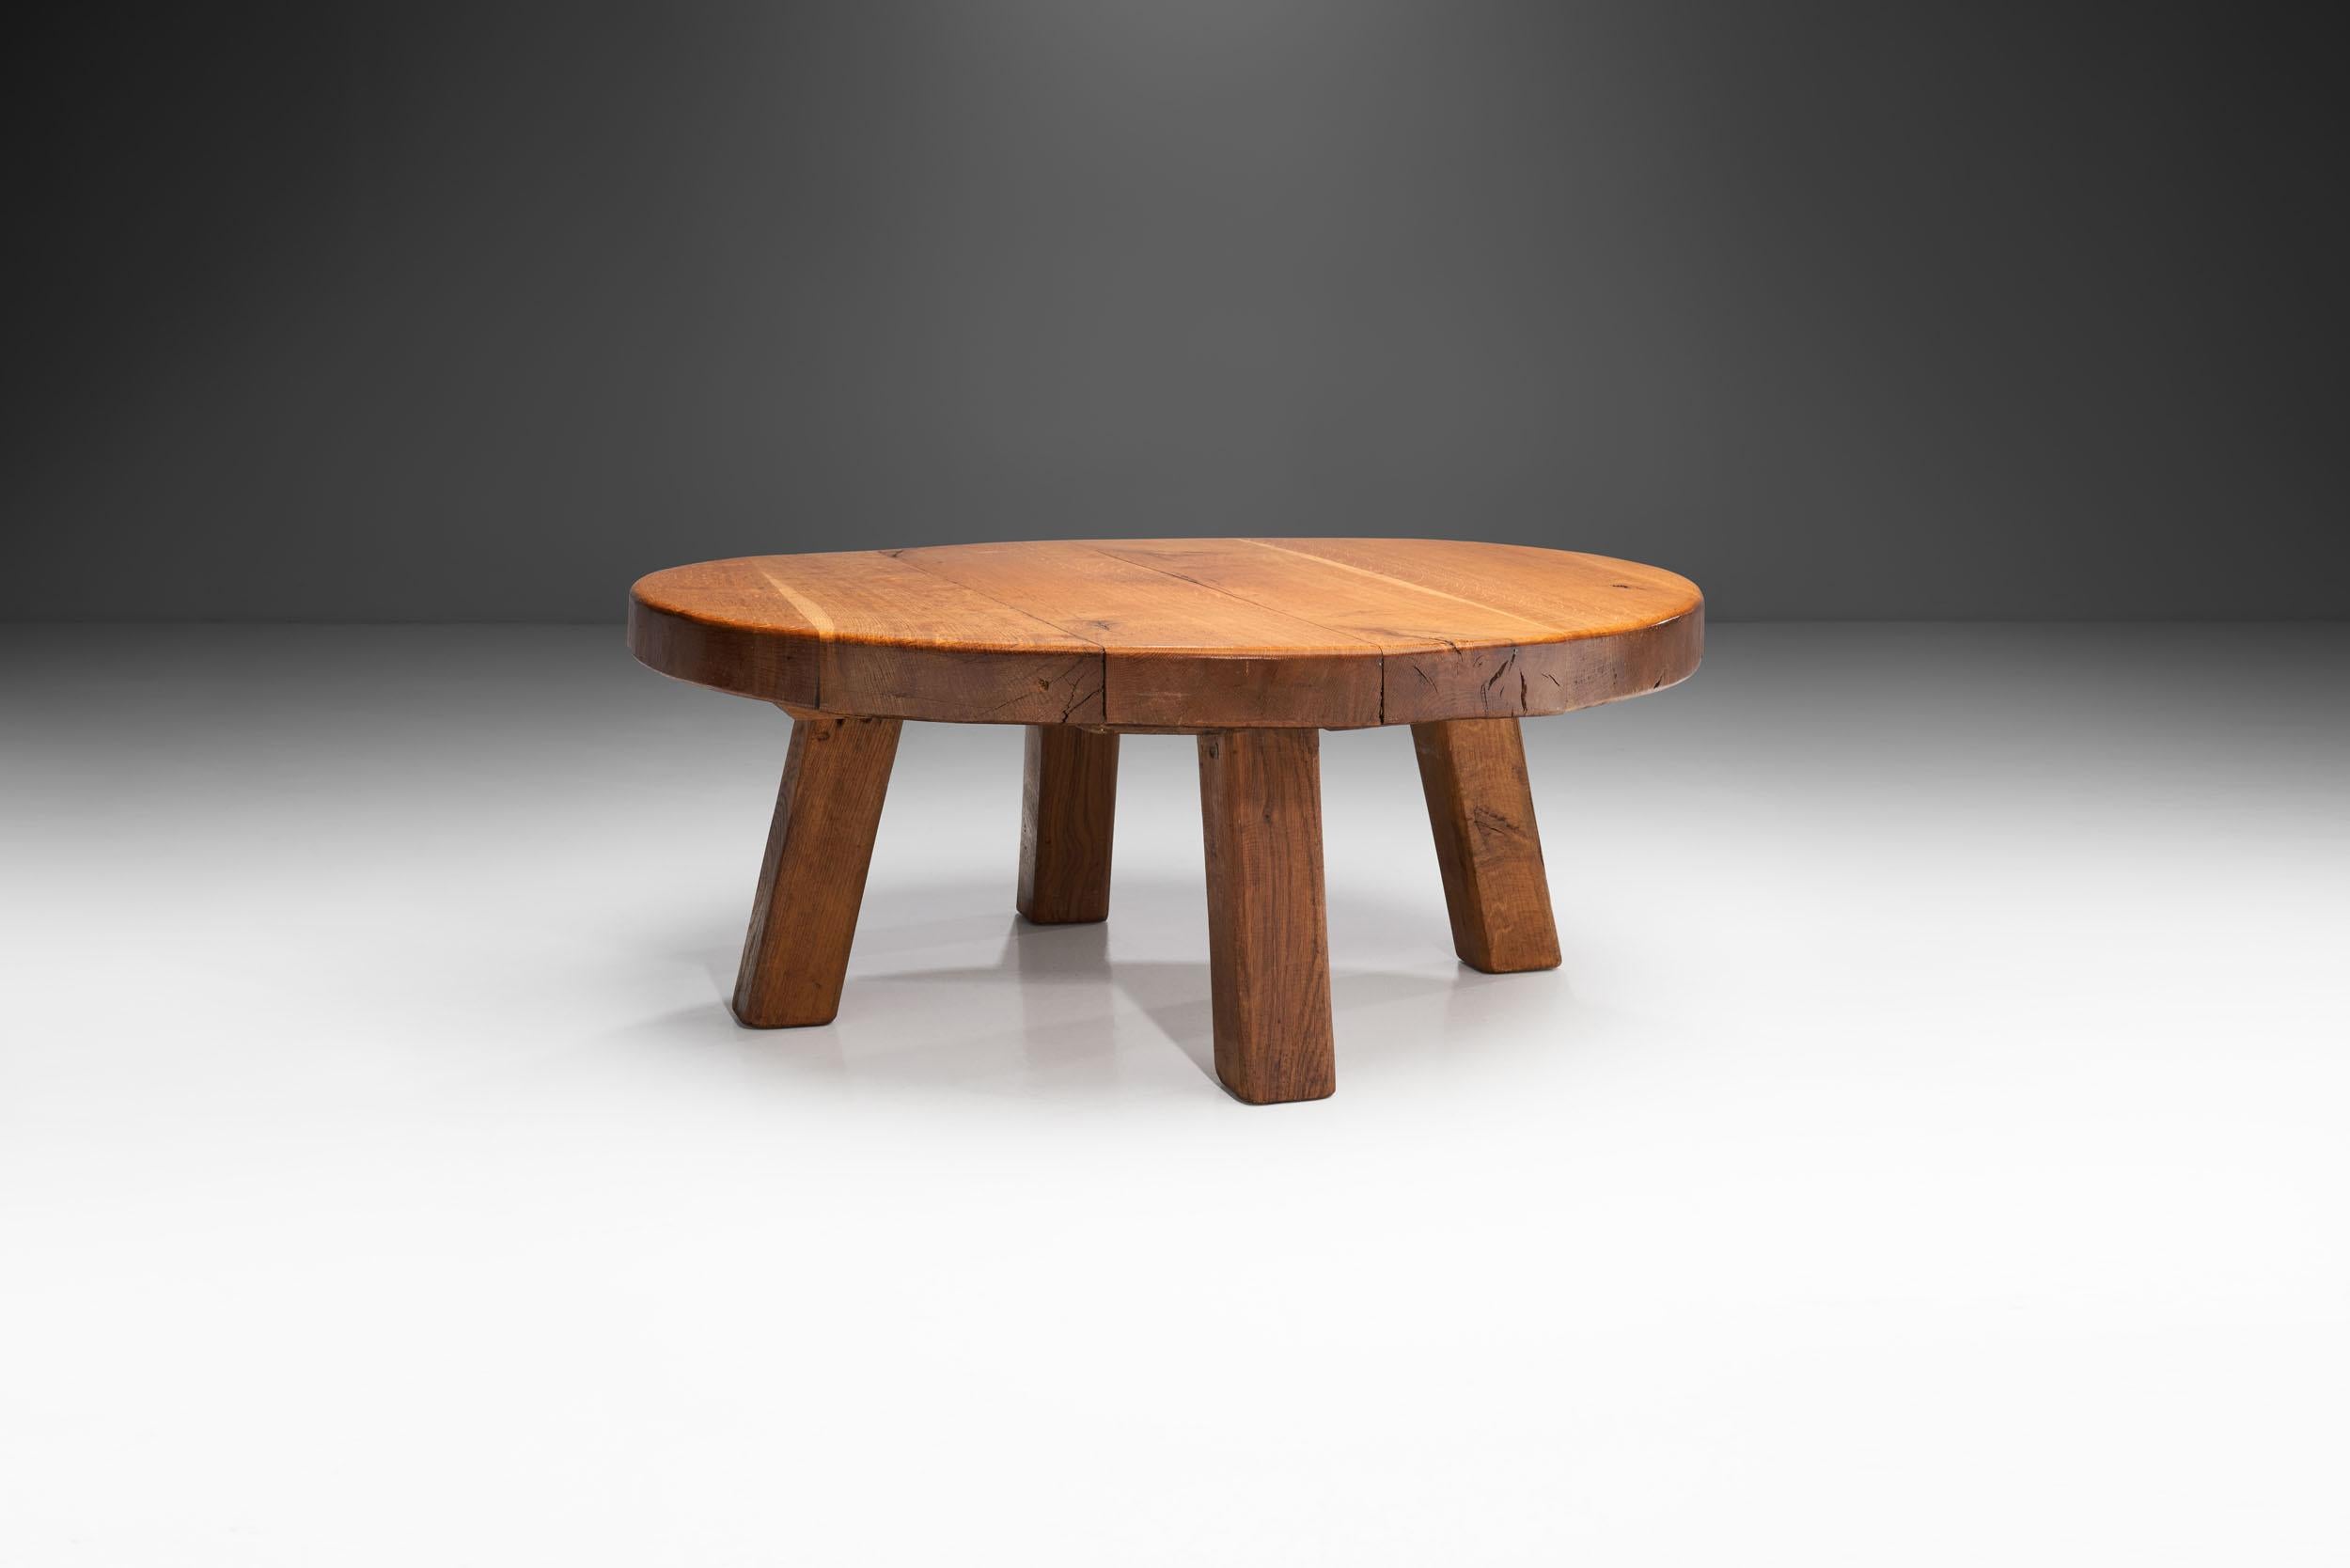 In Scandinavian mid-century design, there was an early emphasis on wood as it connected everyday objects, such as furniture to nature. This rustic, solid oak coffee table is a perfect example of this sentiment, and the visual benefits of an